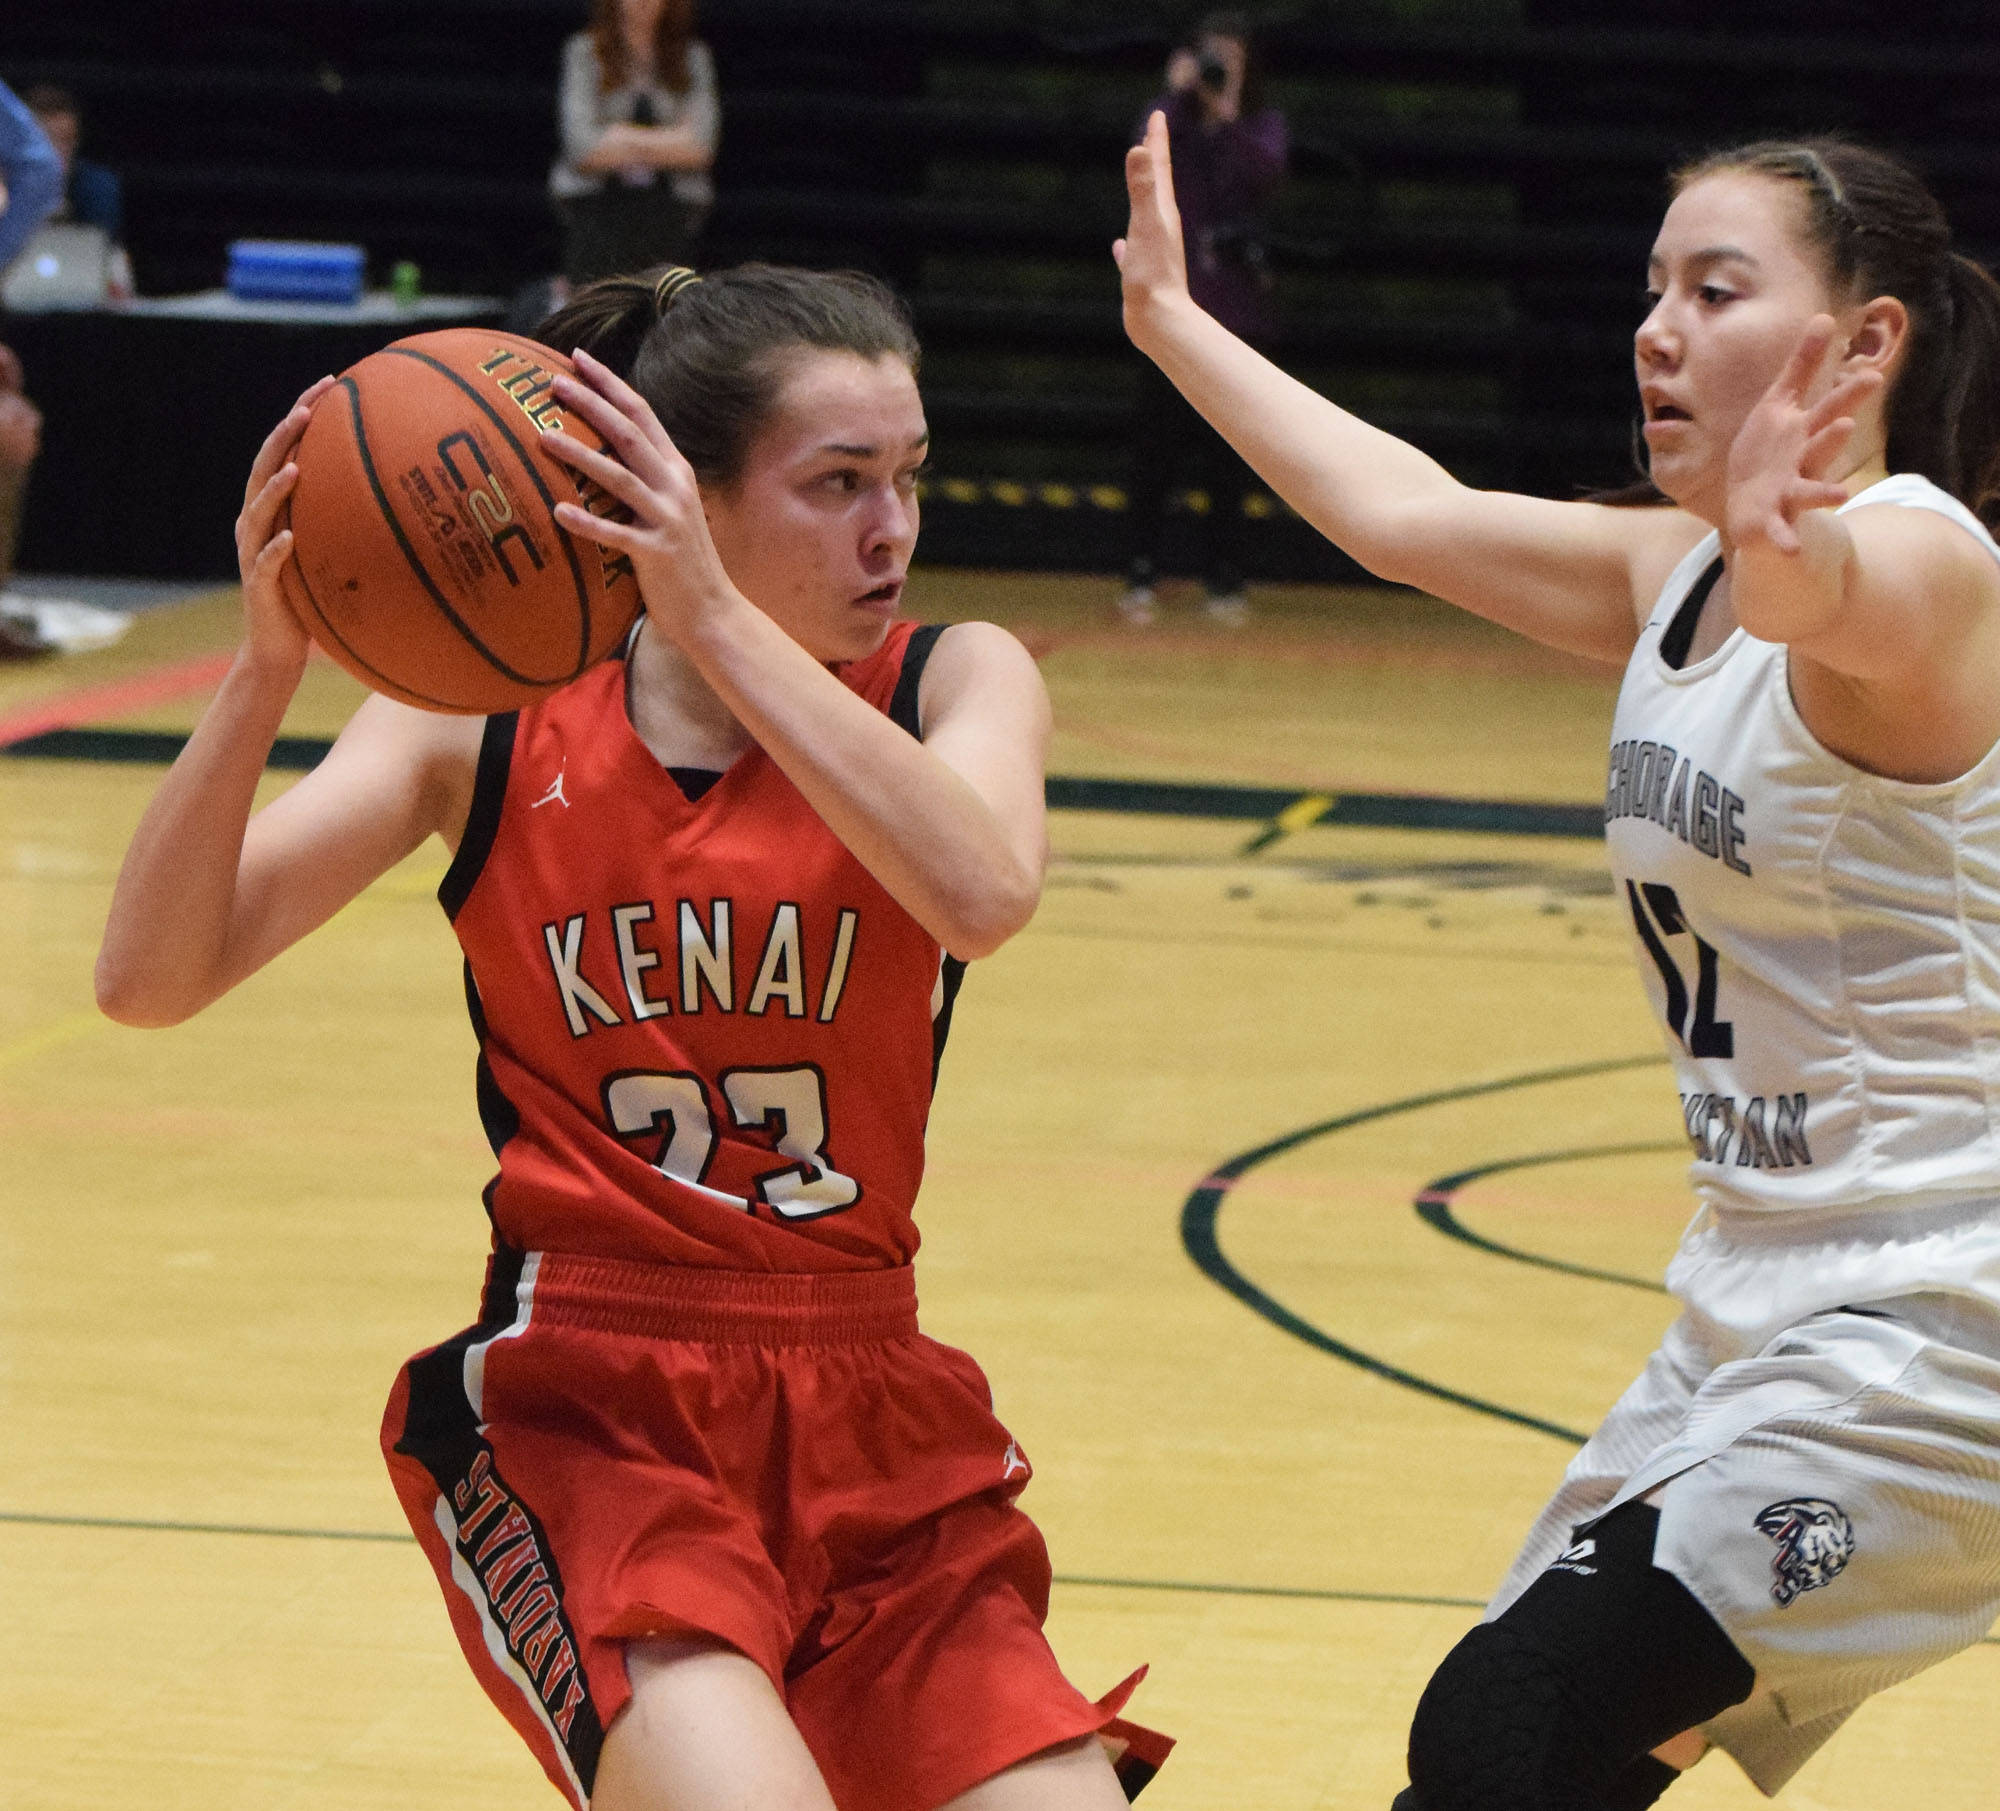 Kenai’s Logan Satathite (left) looks for an open teammate against ACS’s Taylor Tiulana in front of her Friday, March 22, 2019, at the Class 3A girls state tournament at the Alaska Airlines Center in Anchorage. (Photo by Joey Klecka/Peninsula Clarion)